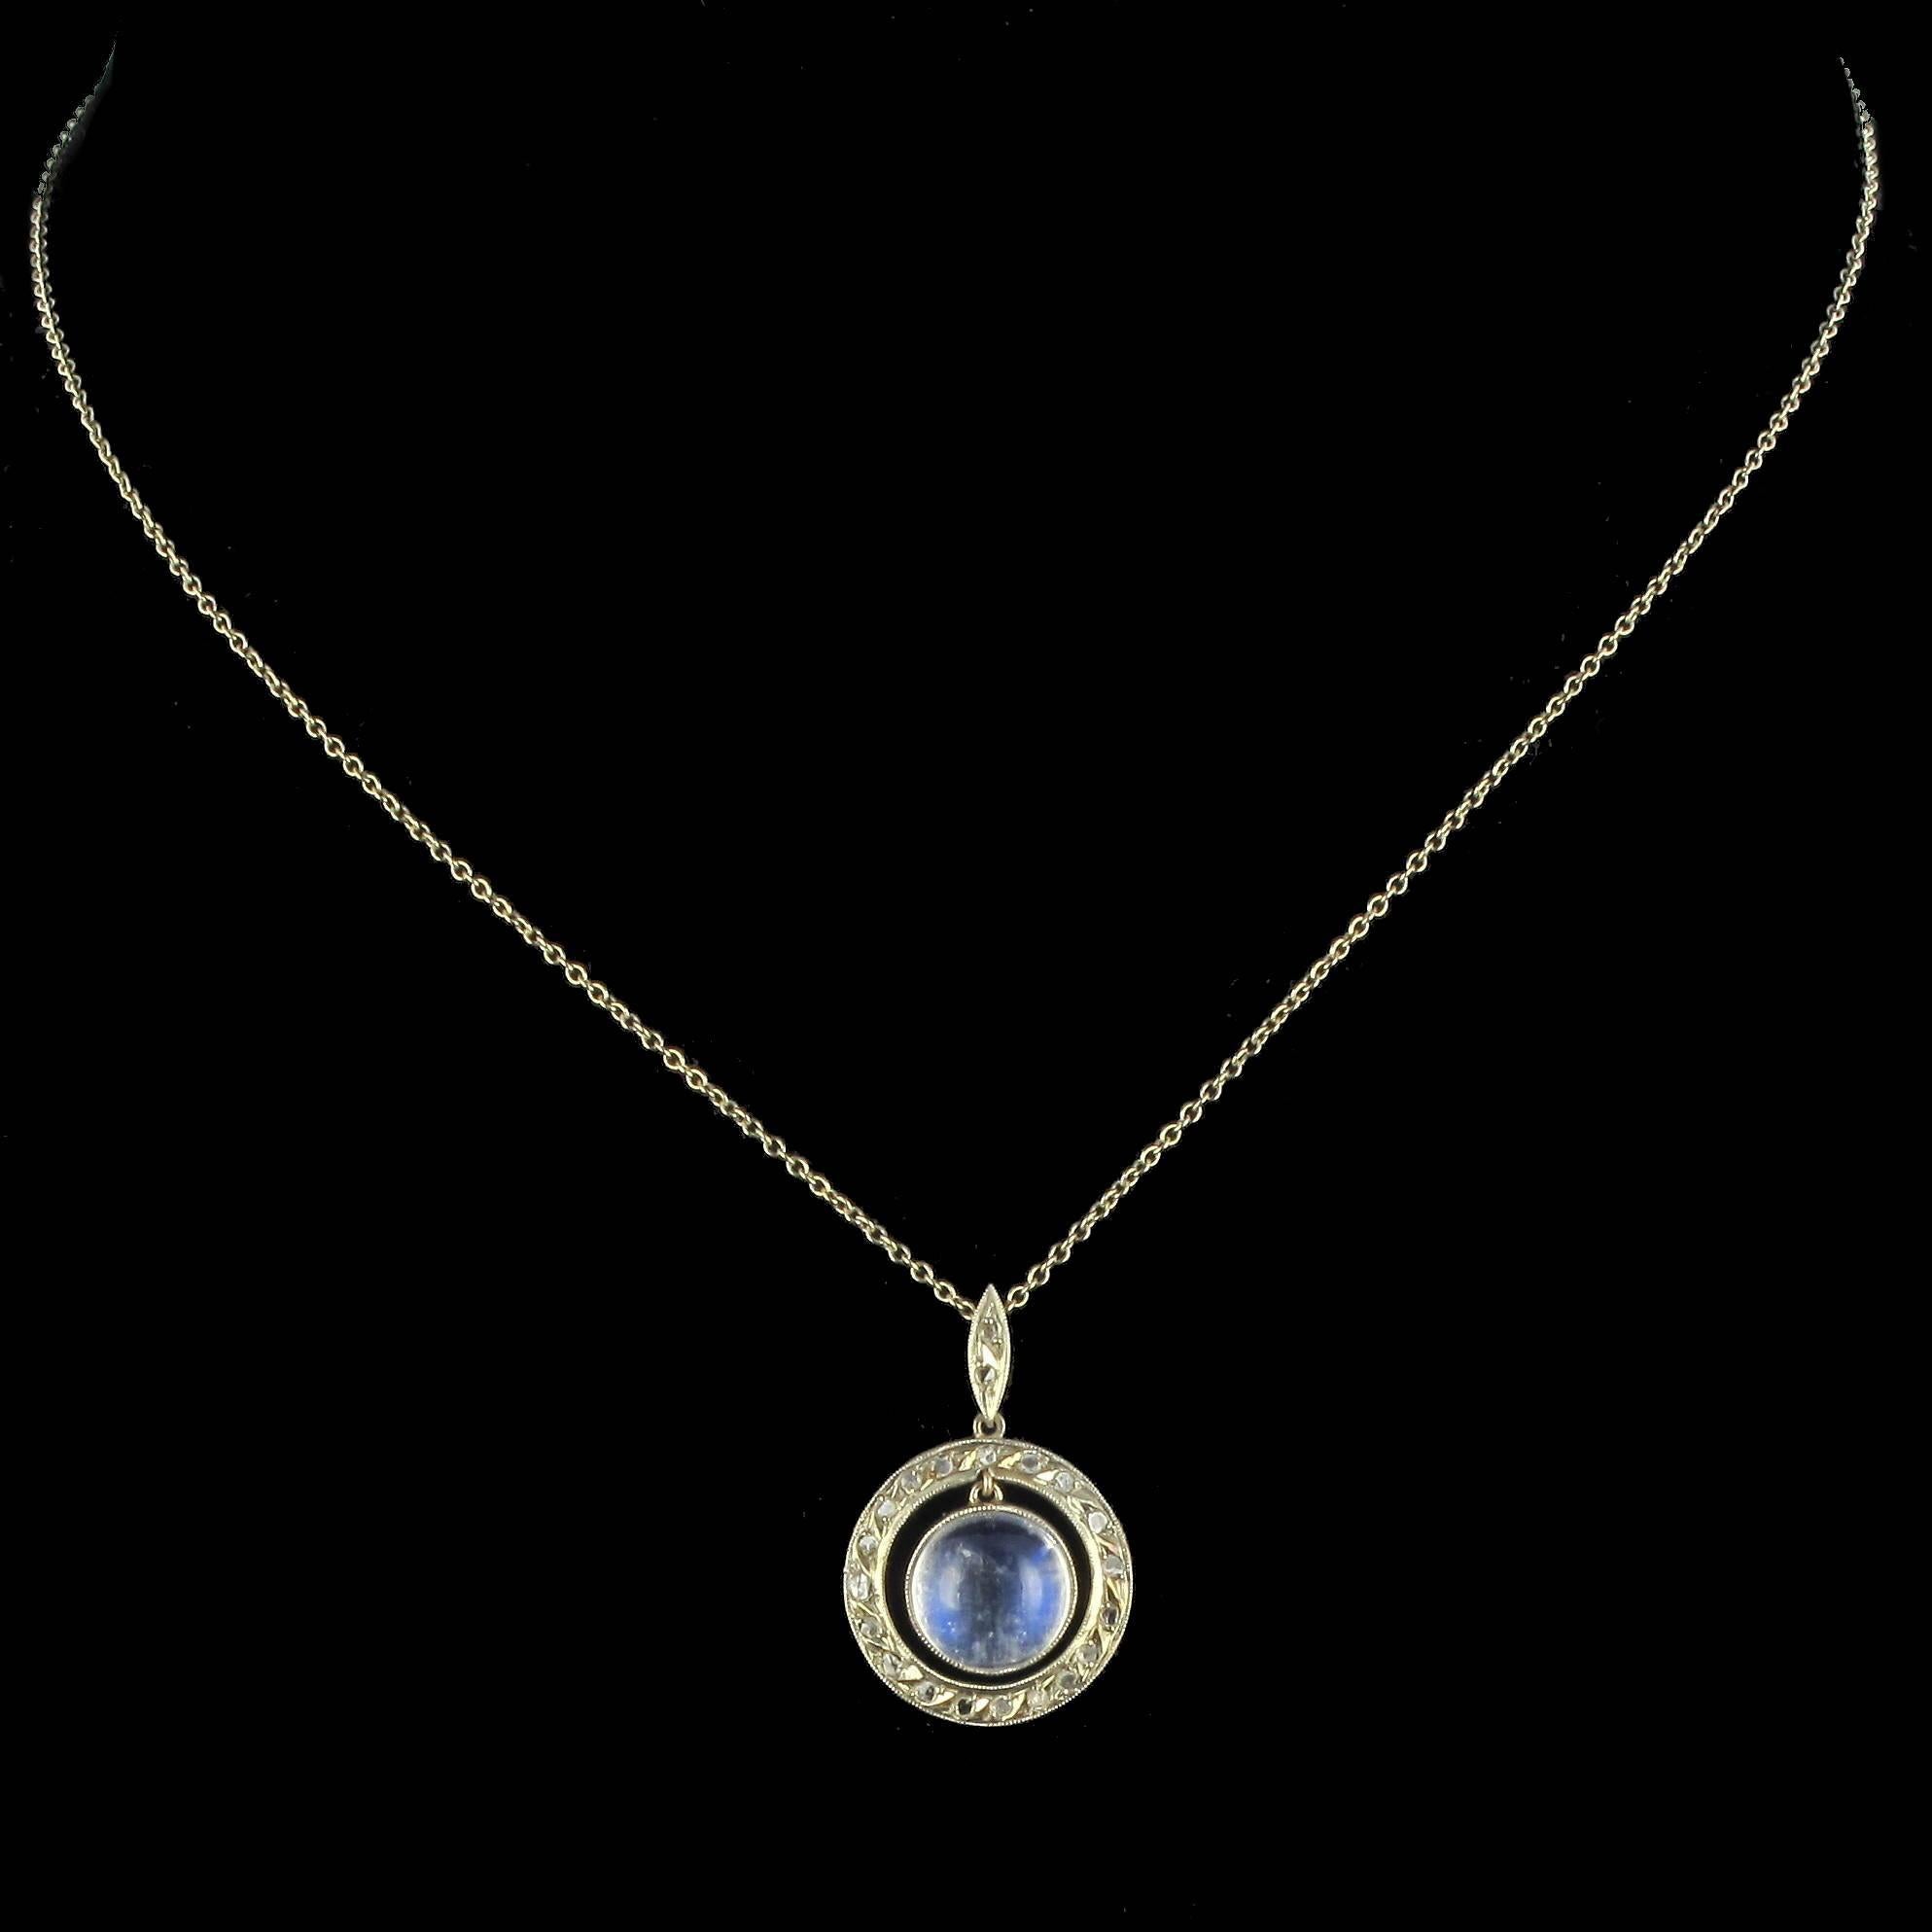 sRing in 18 carat white gold, eagle head hallmark. 

This antique pendant is in the form of a circle set with rose cut diamonds. At the centre of this Art Deco pendant hangs an iridescent moonstone cabochon. The shuttle shaped pendant fitting is